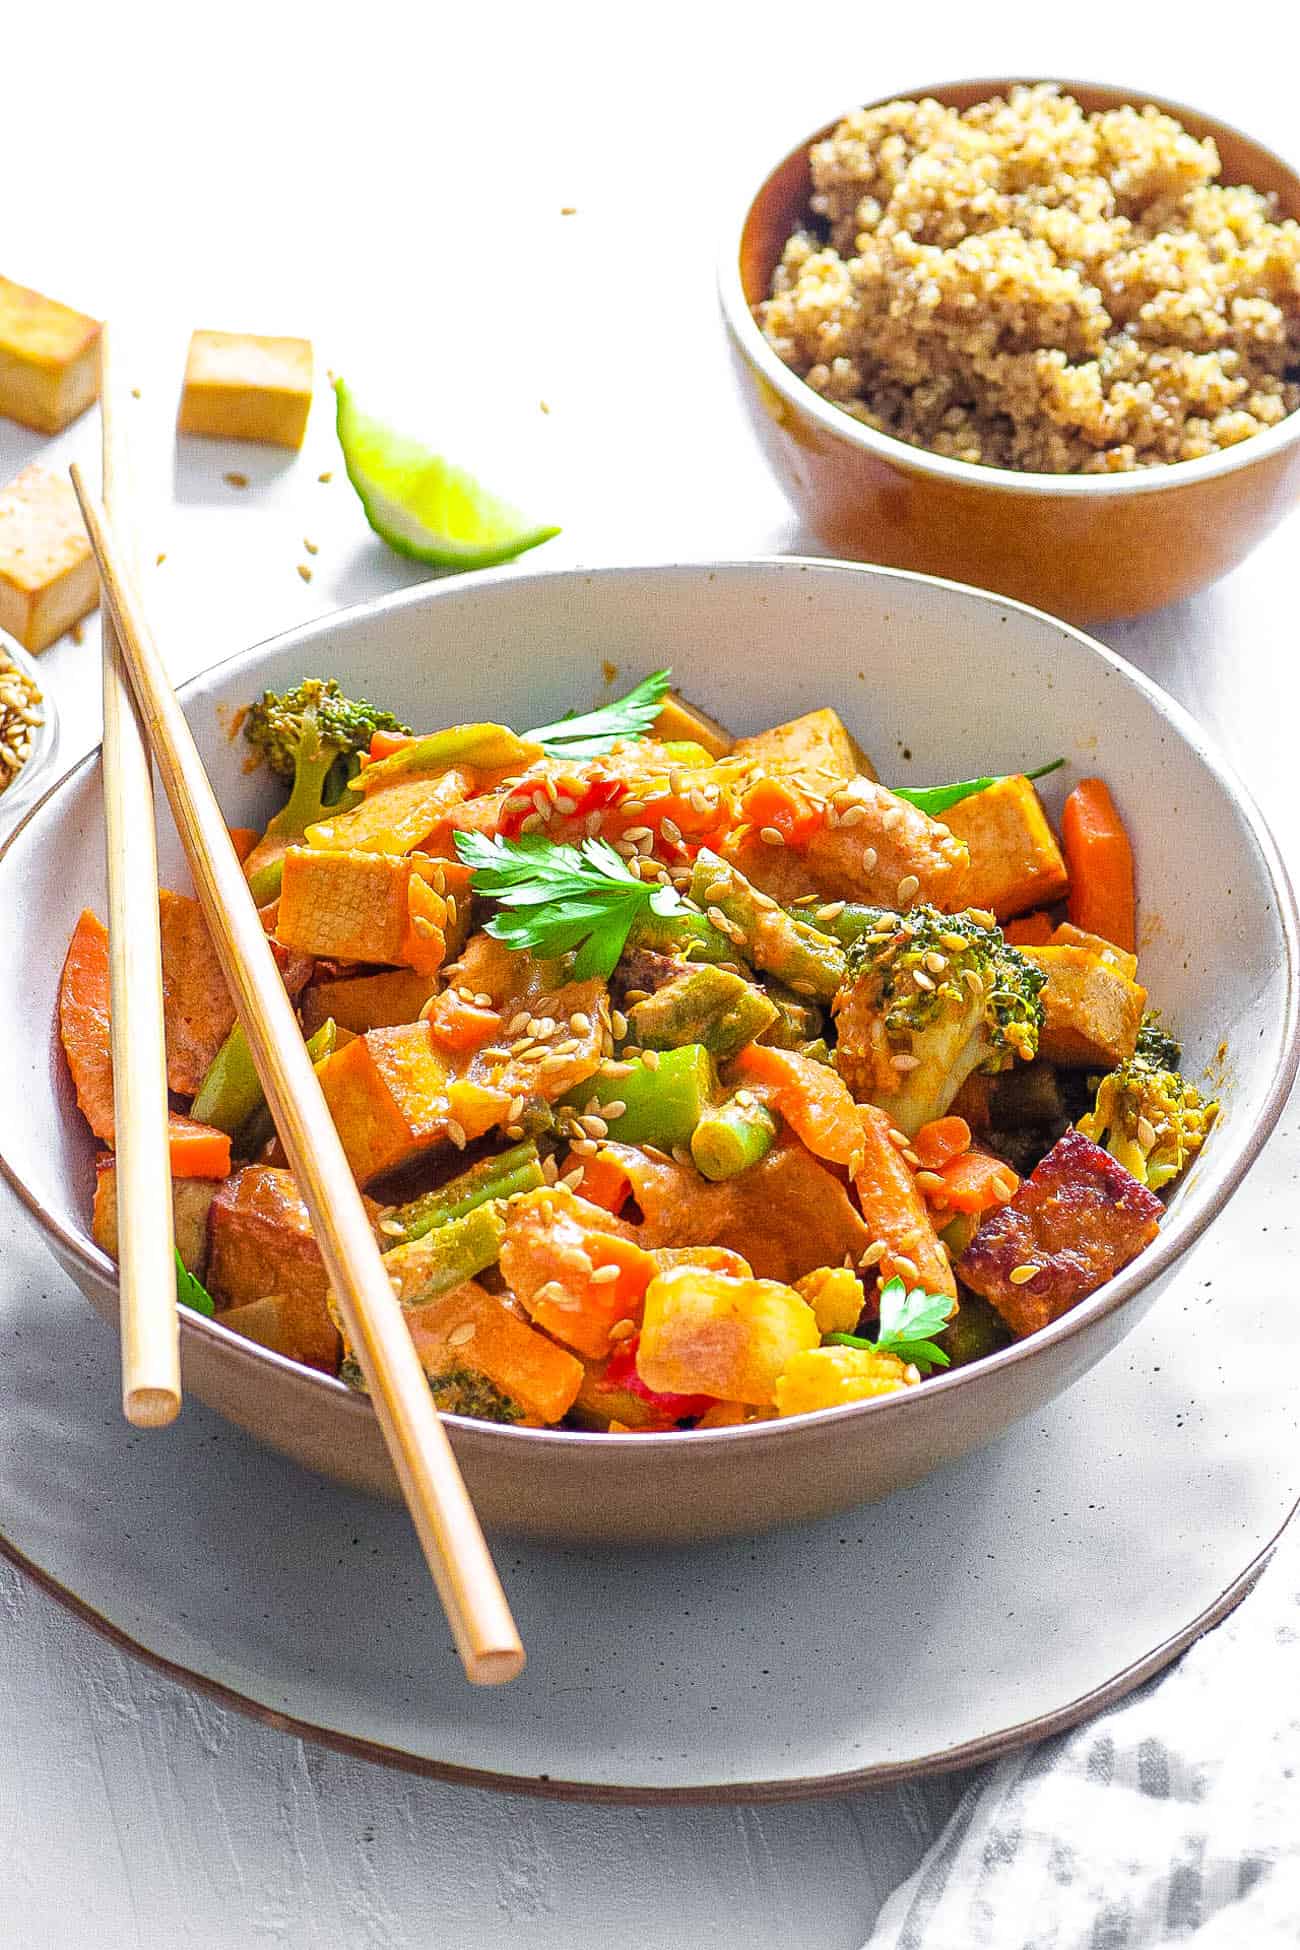 healthy frozen vegetable stir fry recipe served in a white bowl with chopsticks